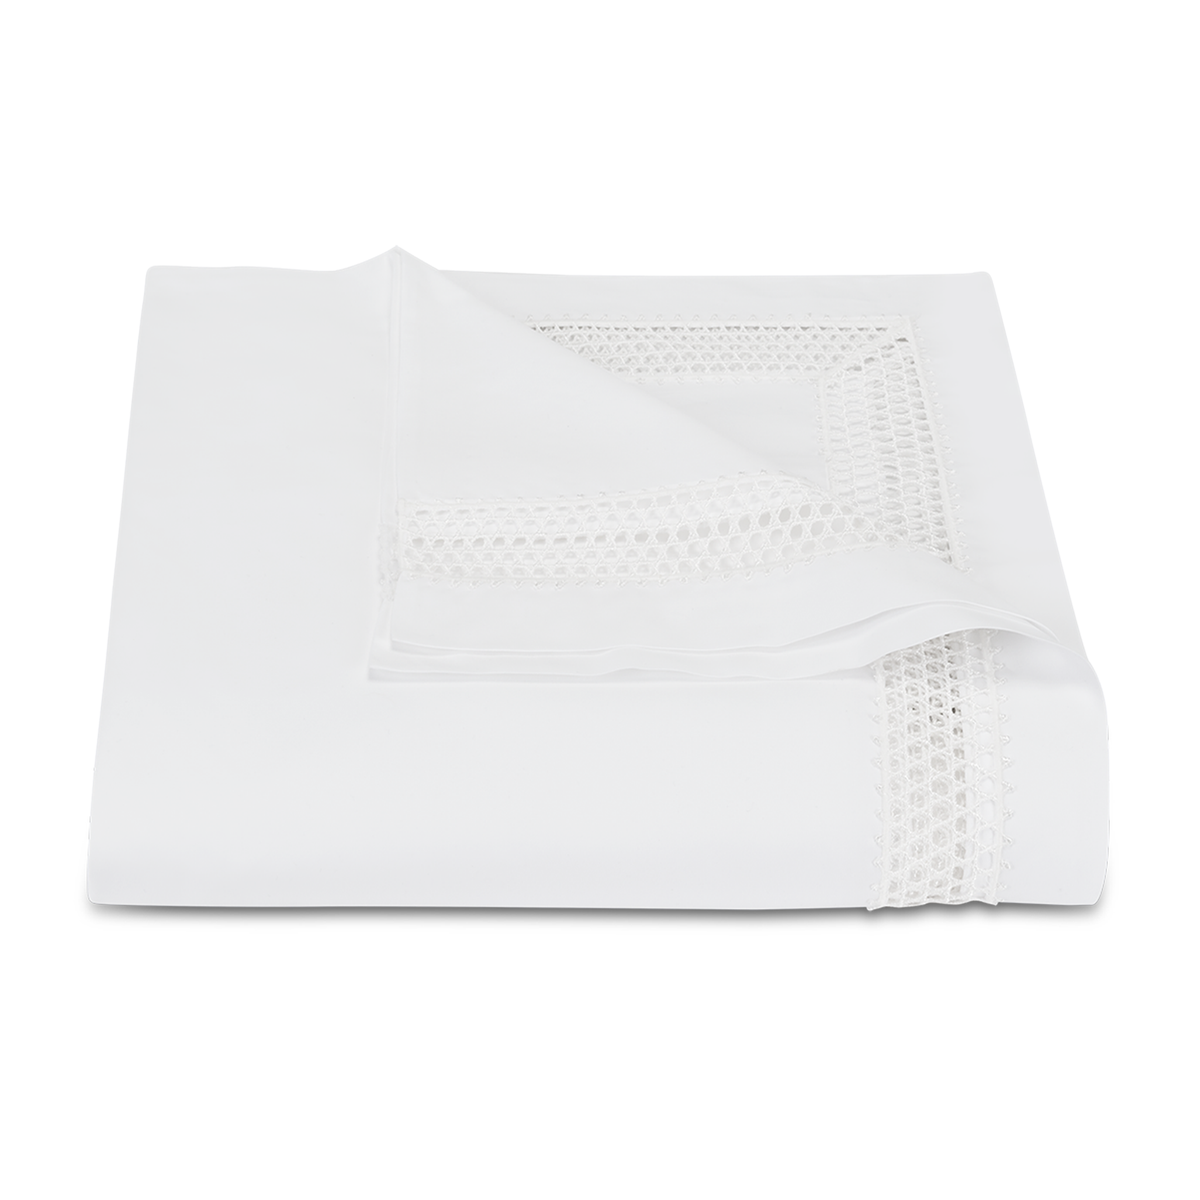 Clear Image of Matouk Cecily Duvet Cover in White Color